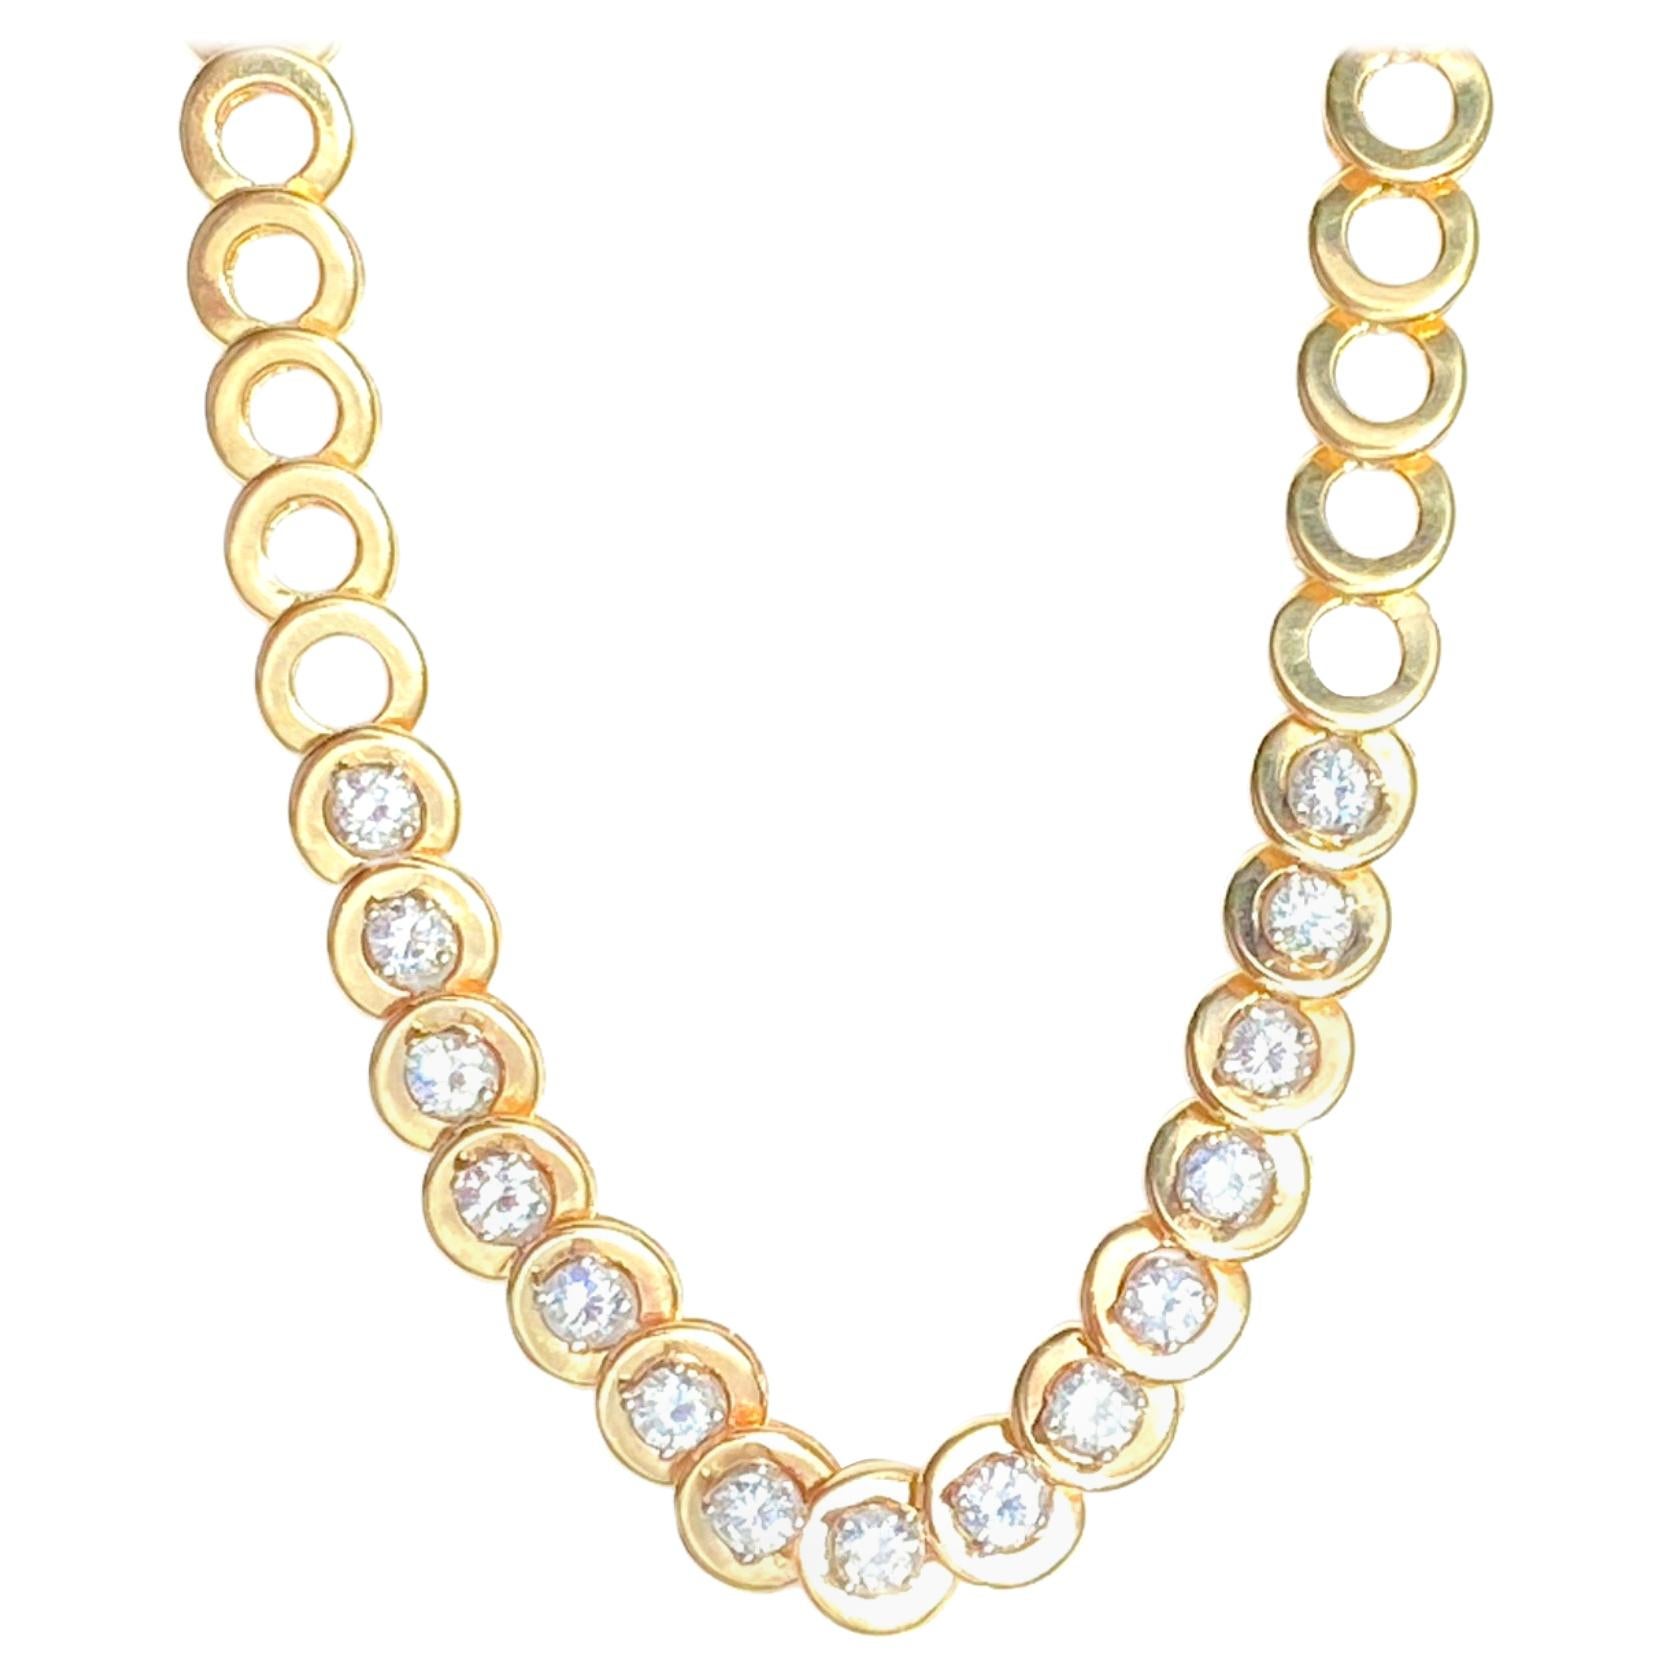 4.00 Carat Round-Brilliant Cut Diamond Chain 14k Yellow Gold Necklace For Sale